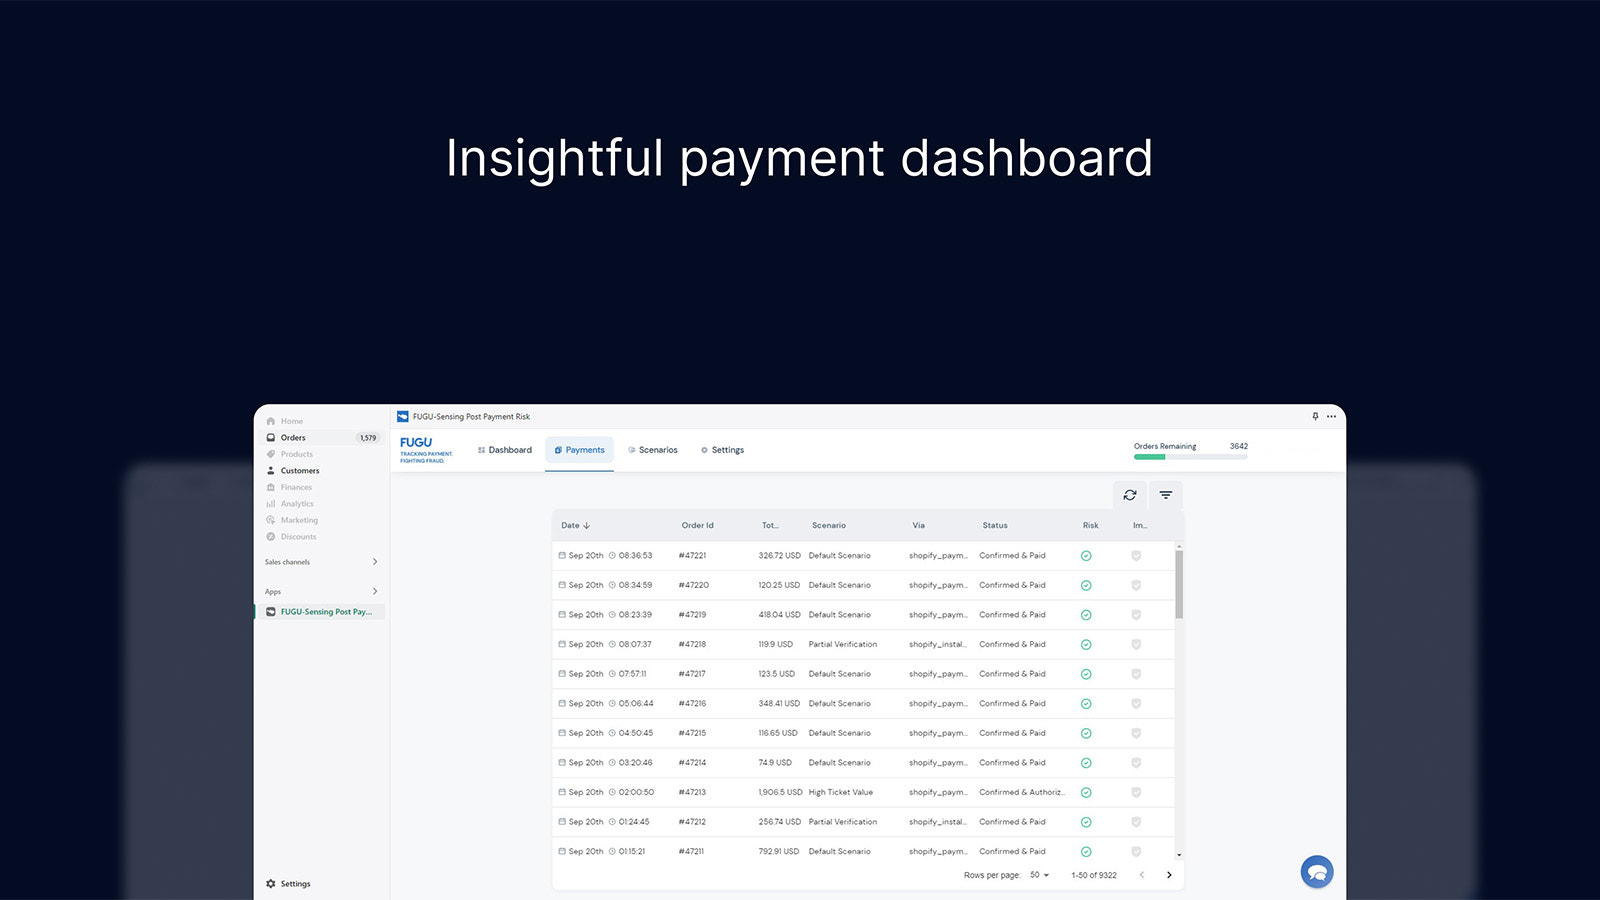 Insightful payment dashboard driving conversion